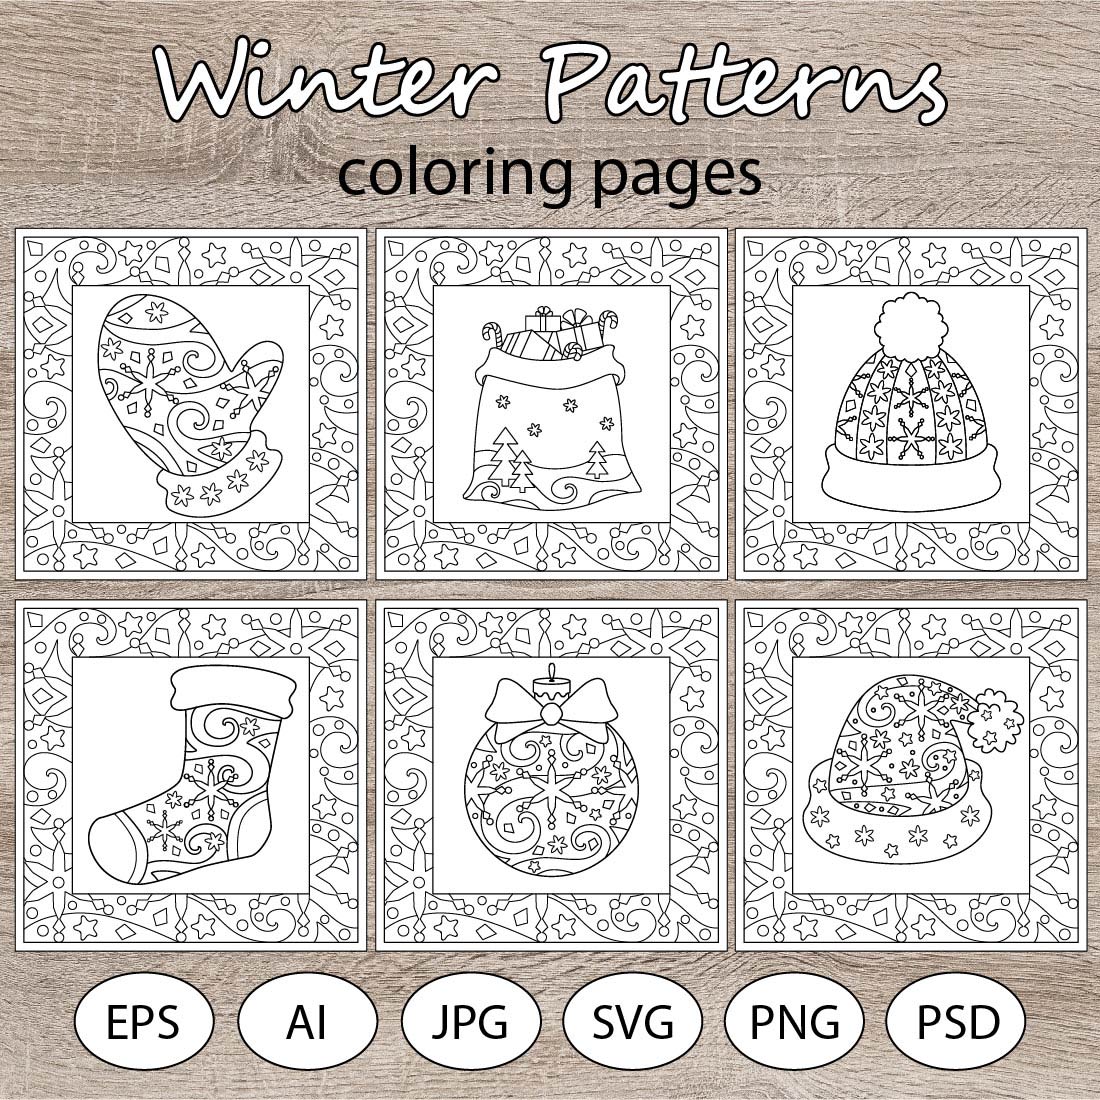 Winter Patterns - 6 coloring pages cover image.